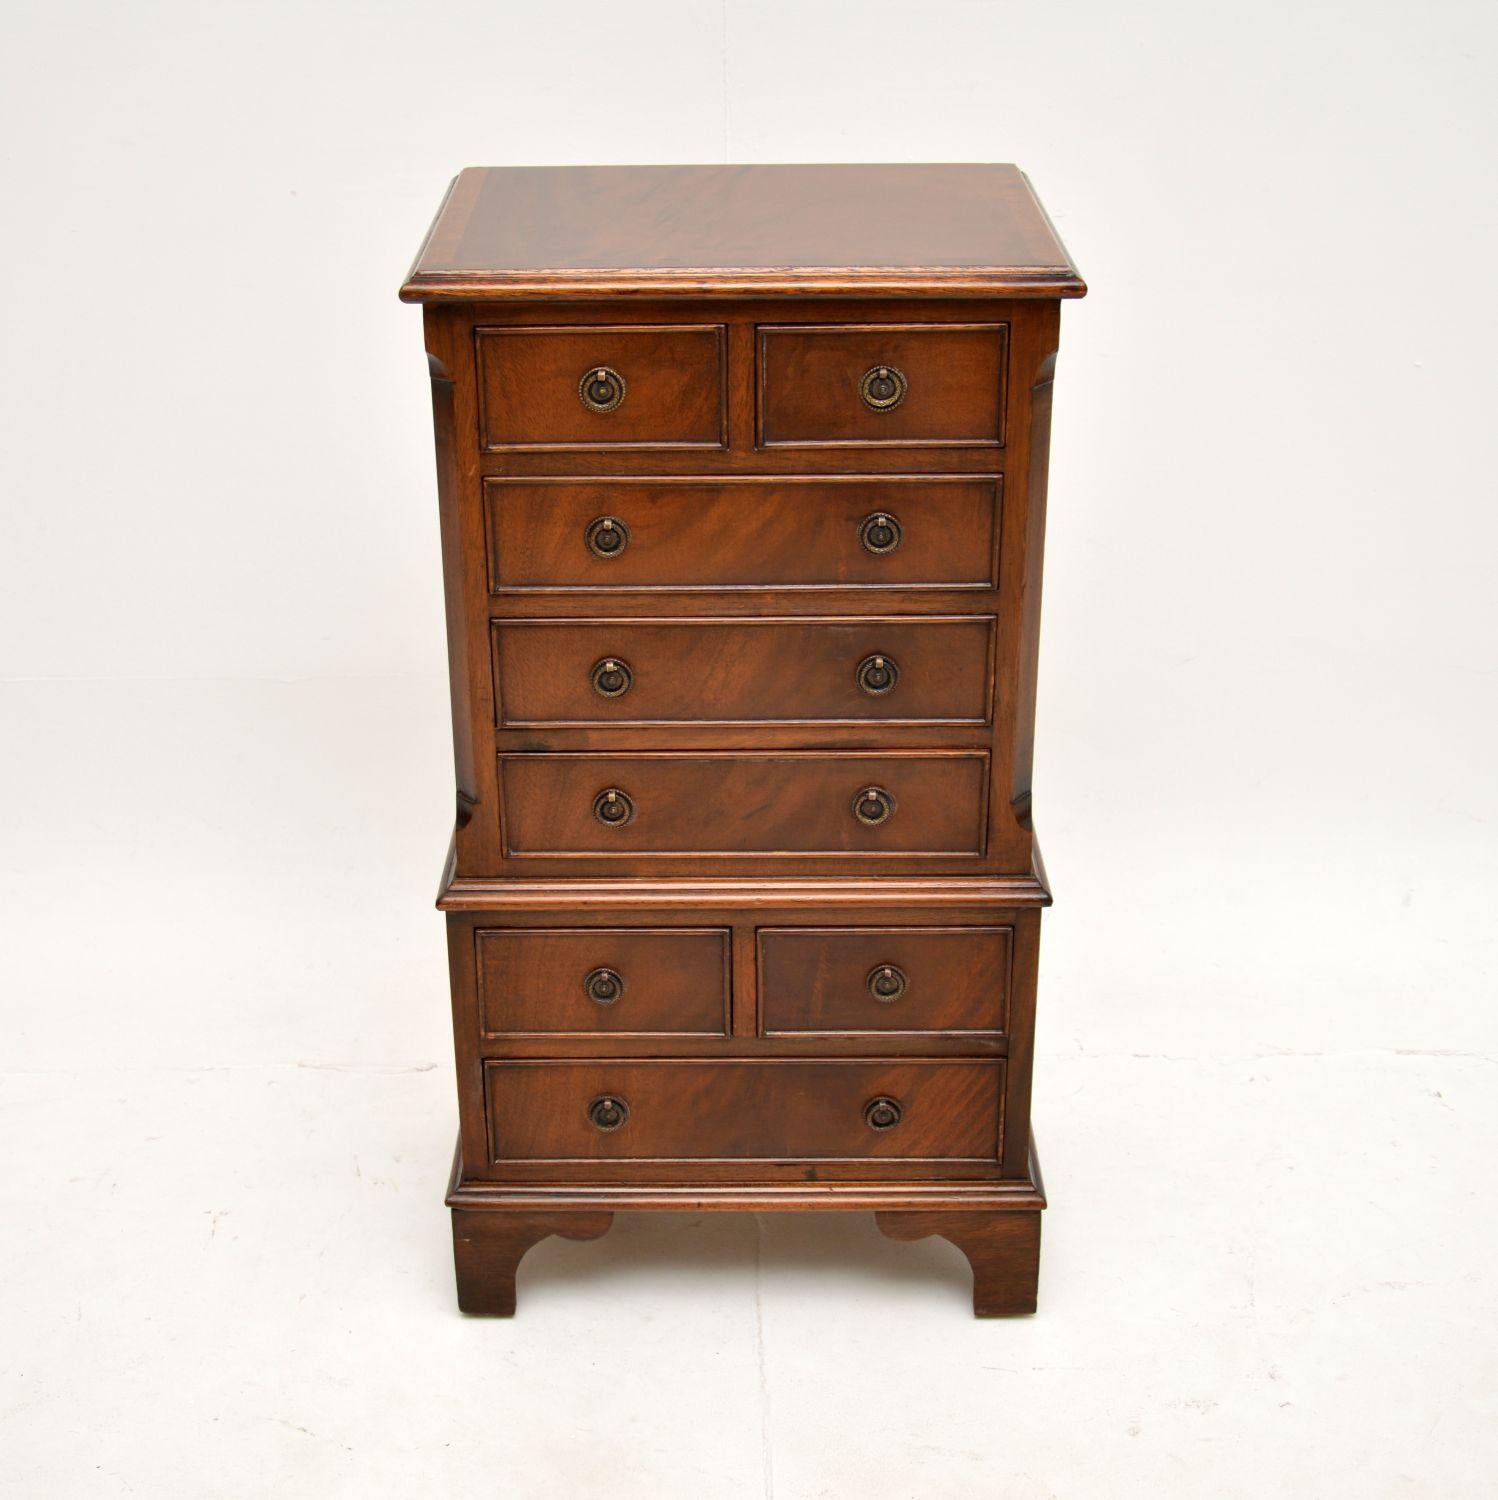 A lovely small antique Georgian style chest of drawers. This was made in England, it dates from around the 1950’s.

This is of superb quality and is a very useful size, this model is often called a glove chest. It is low and narrow, useful as a side